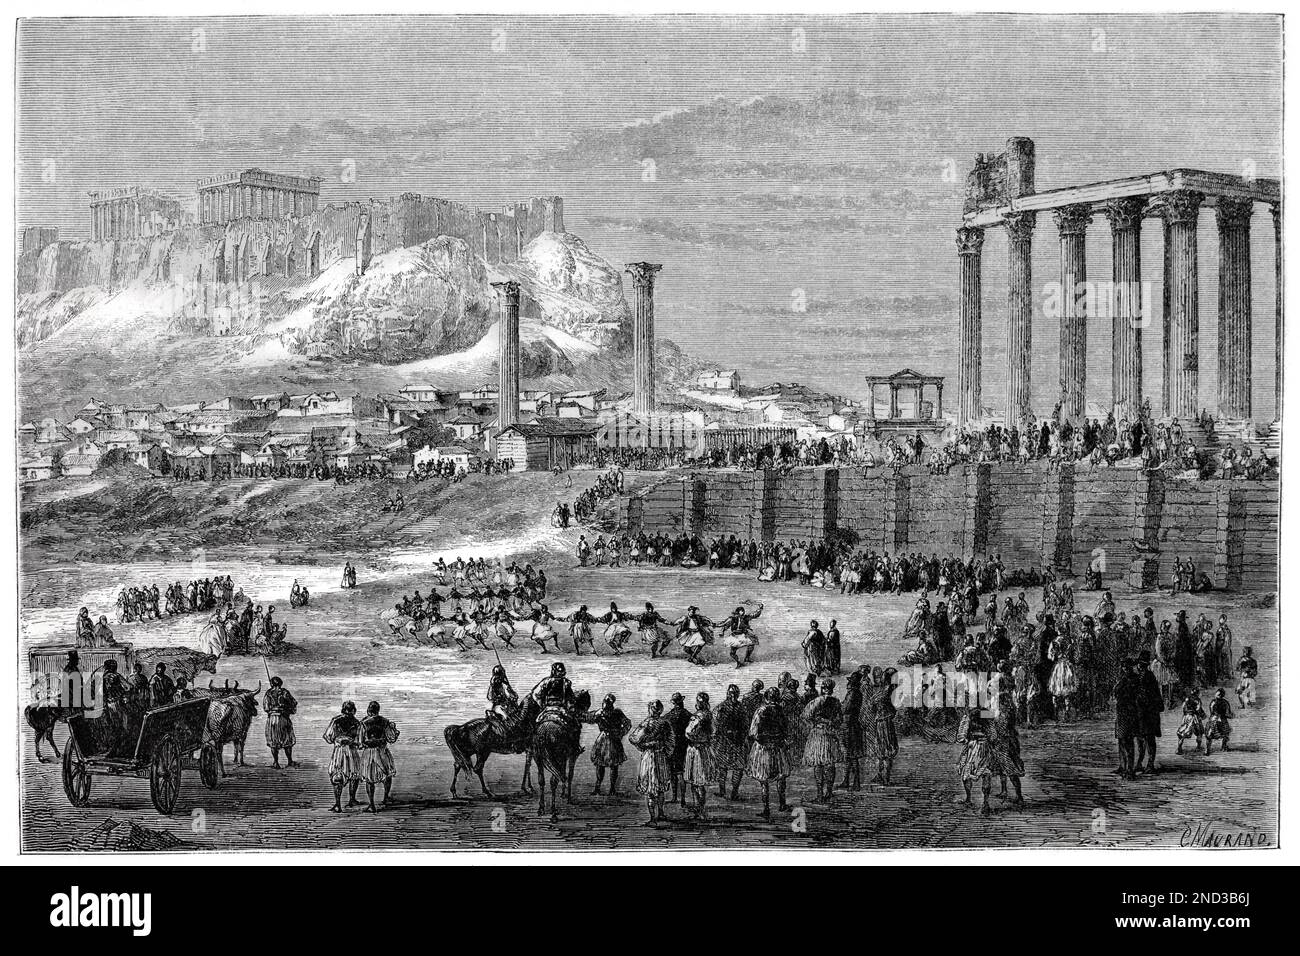 Festival of Lent with Folk Dancers at the Temple of Olympian Zeus, aka Olympieion or Columns of the Olympian Zeus (561/527BC - 131AD) Athens Greece. Vintage Engraving or Illustration 1862 Stock Photo